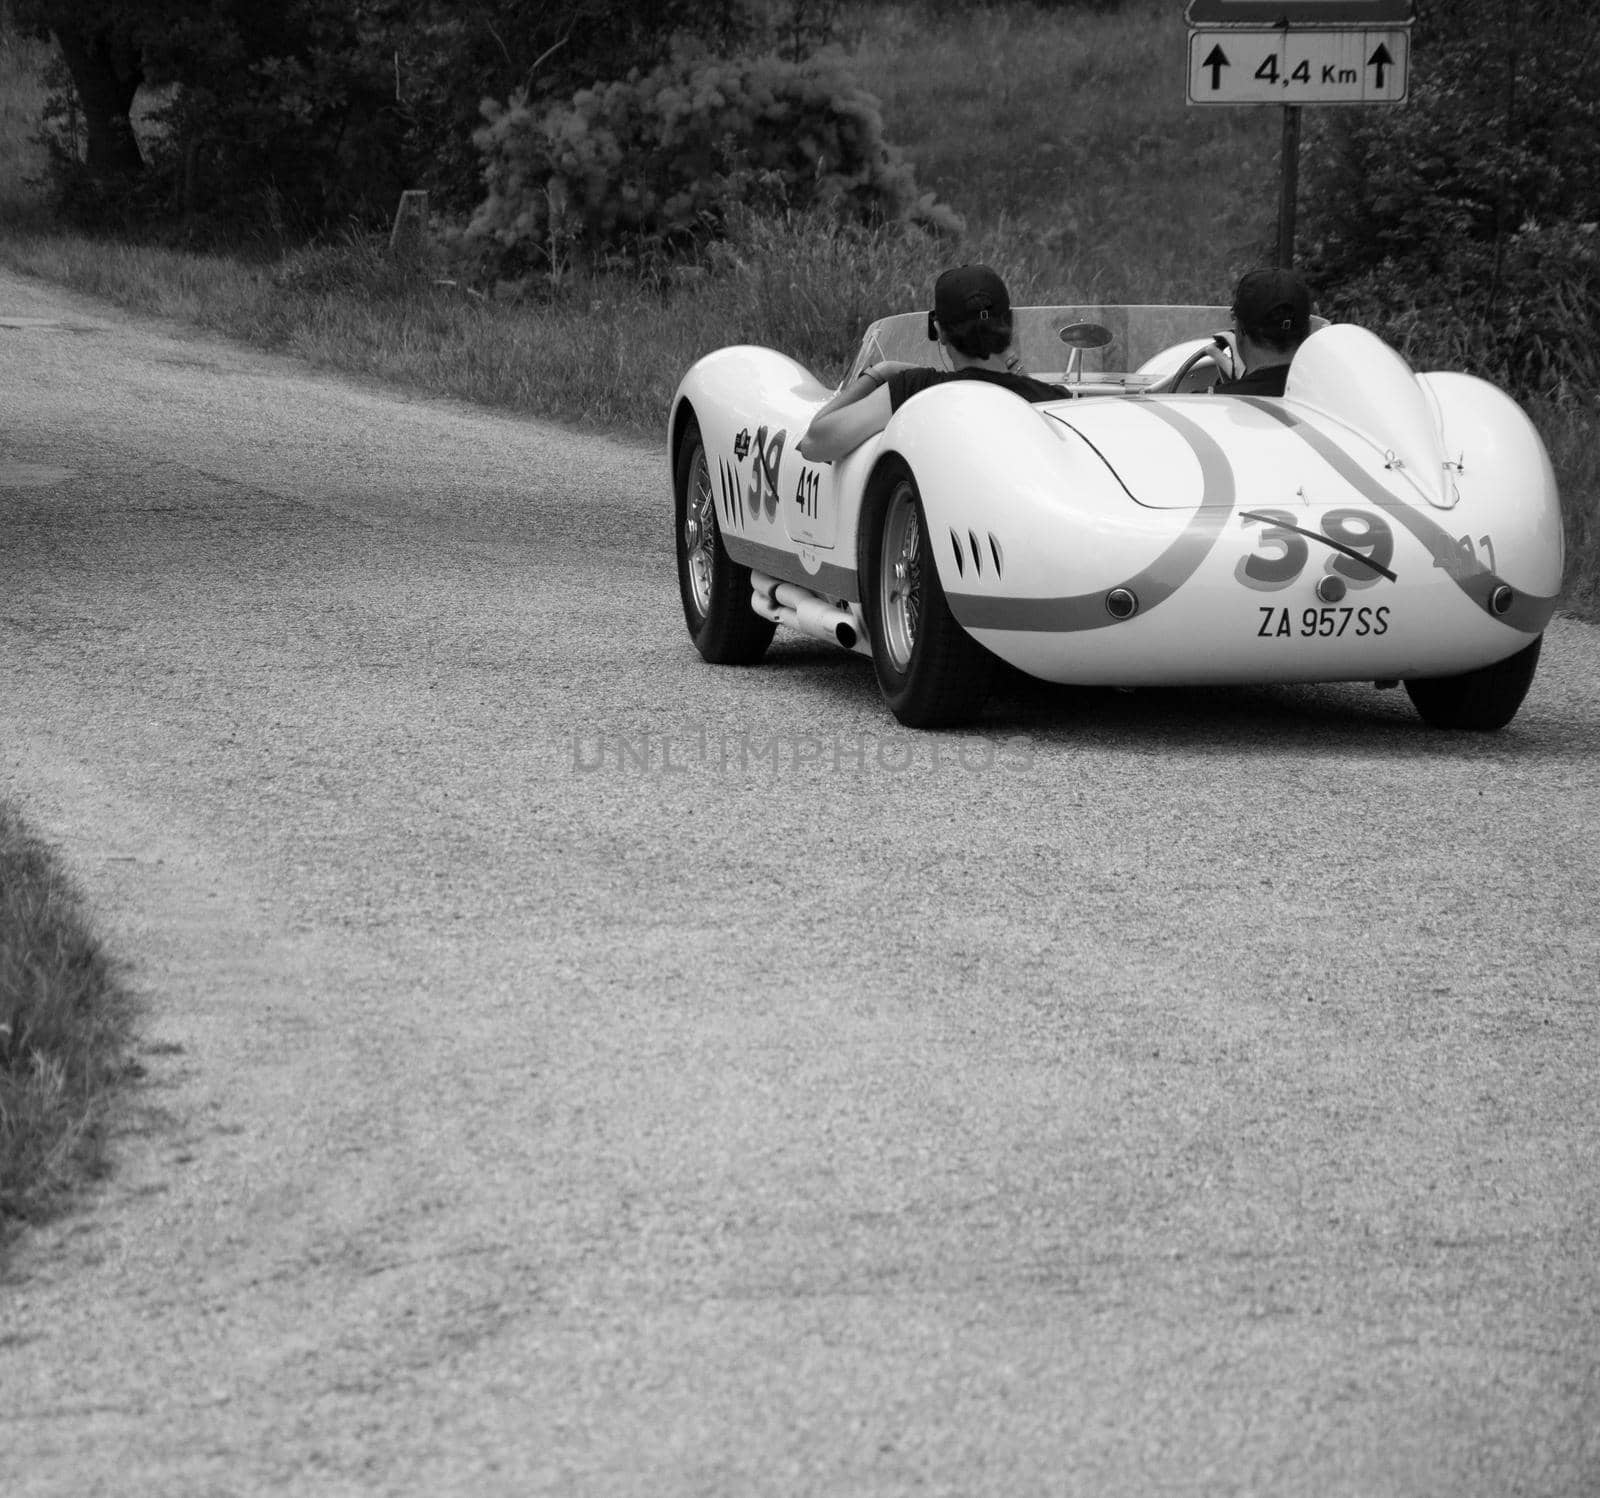 MASERATI 200 SI 1956 on an old racing car in rally Mille Miglia 2022 the famous italian historical race (1927-1957 by massimocampanari